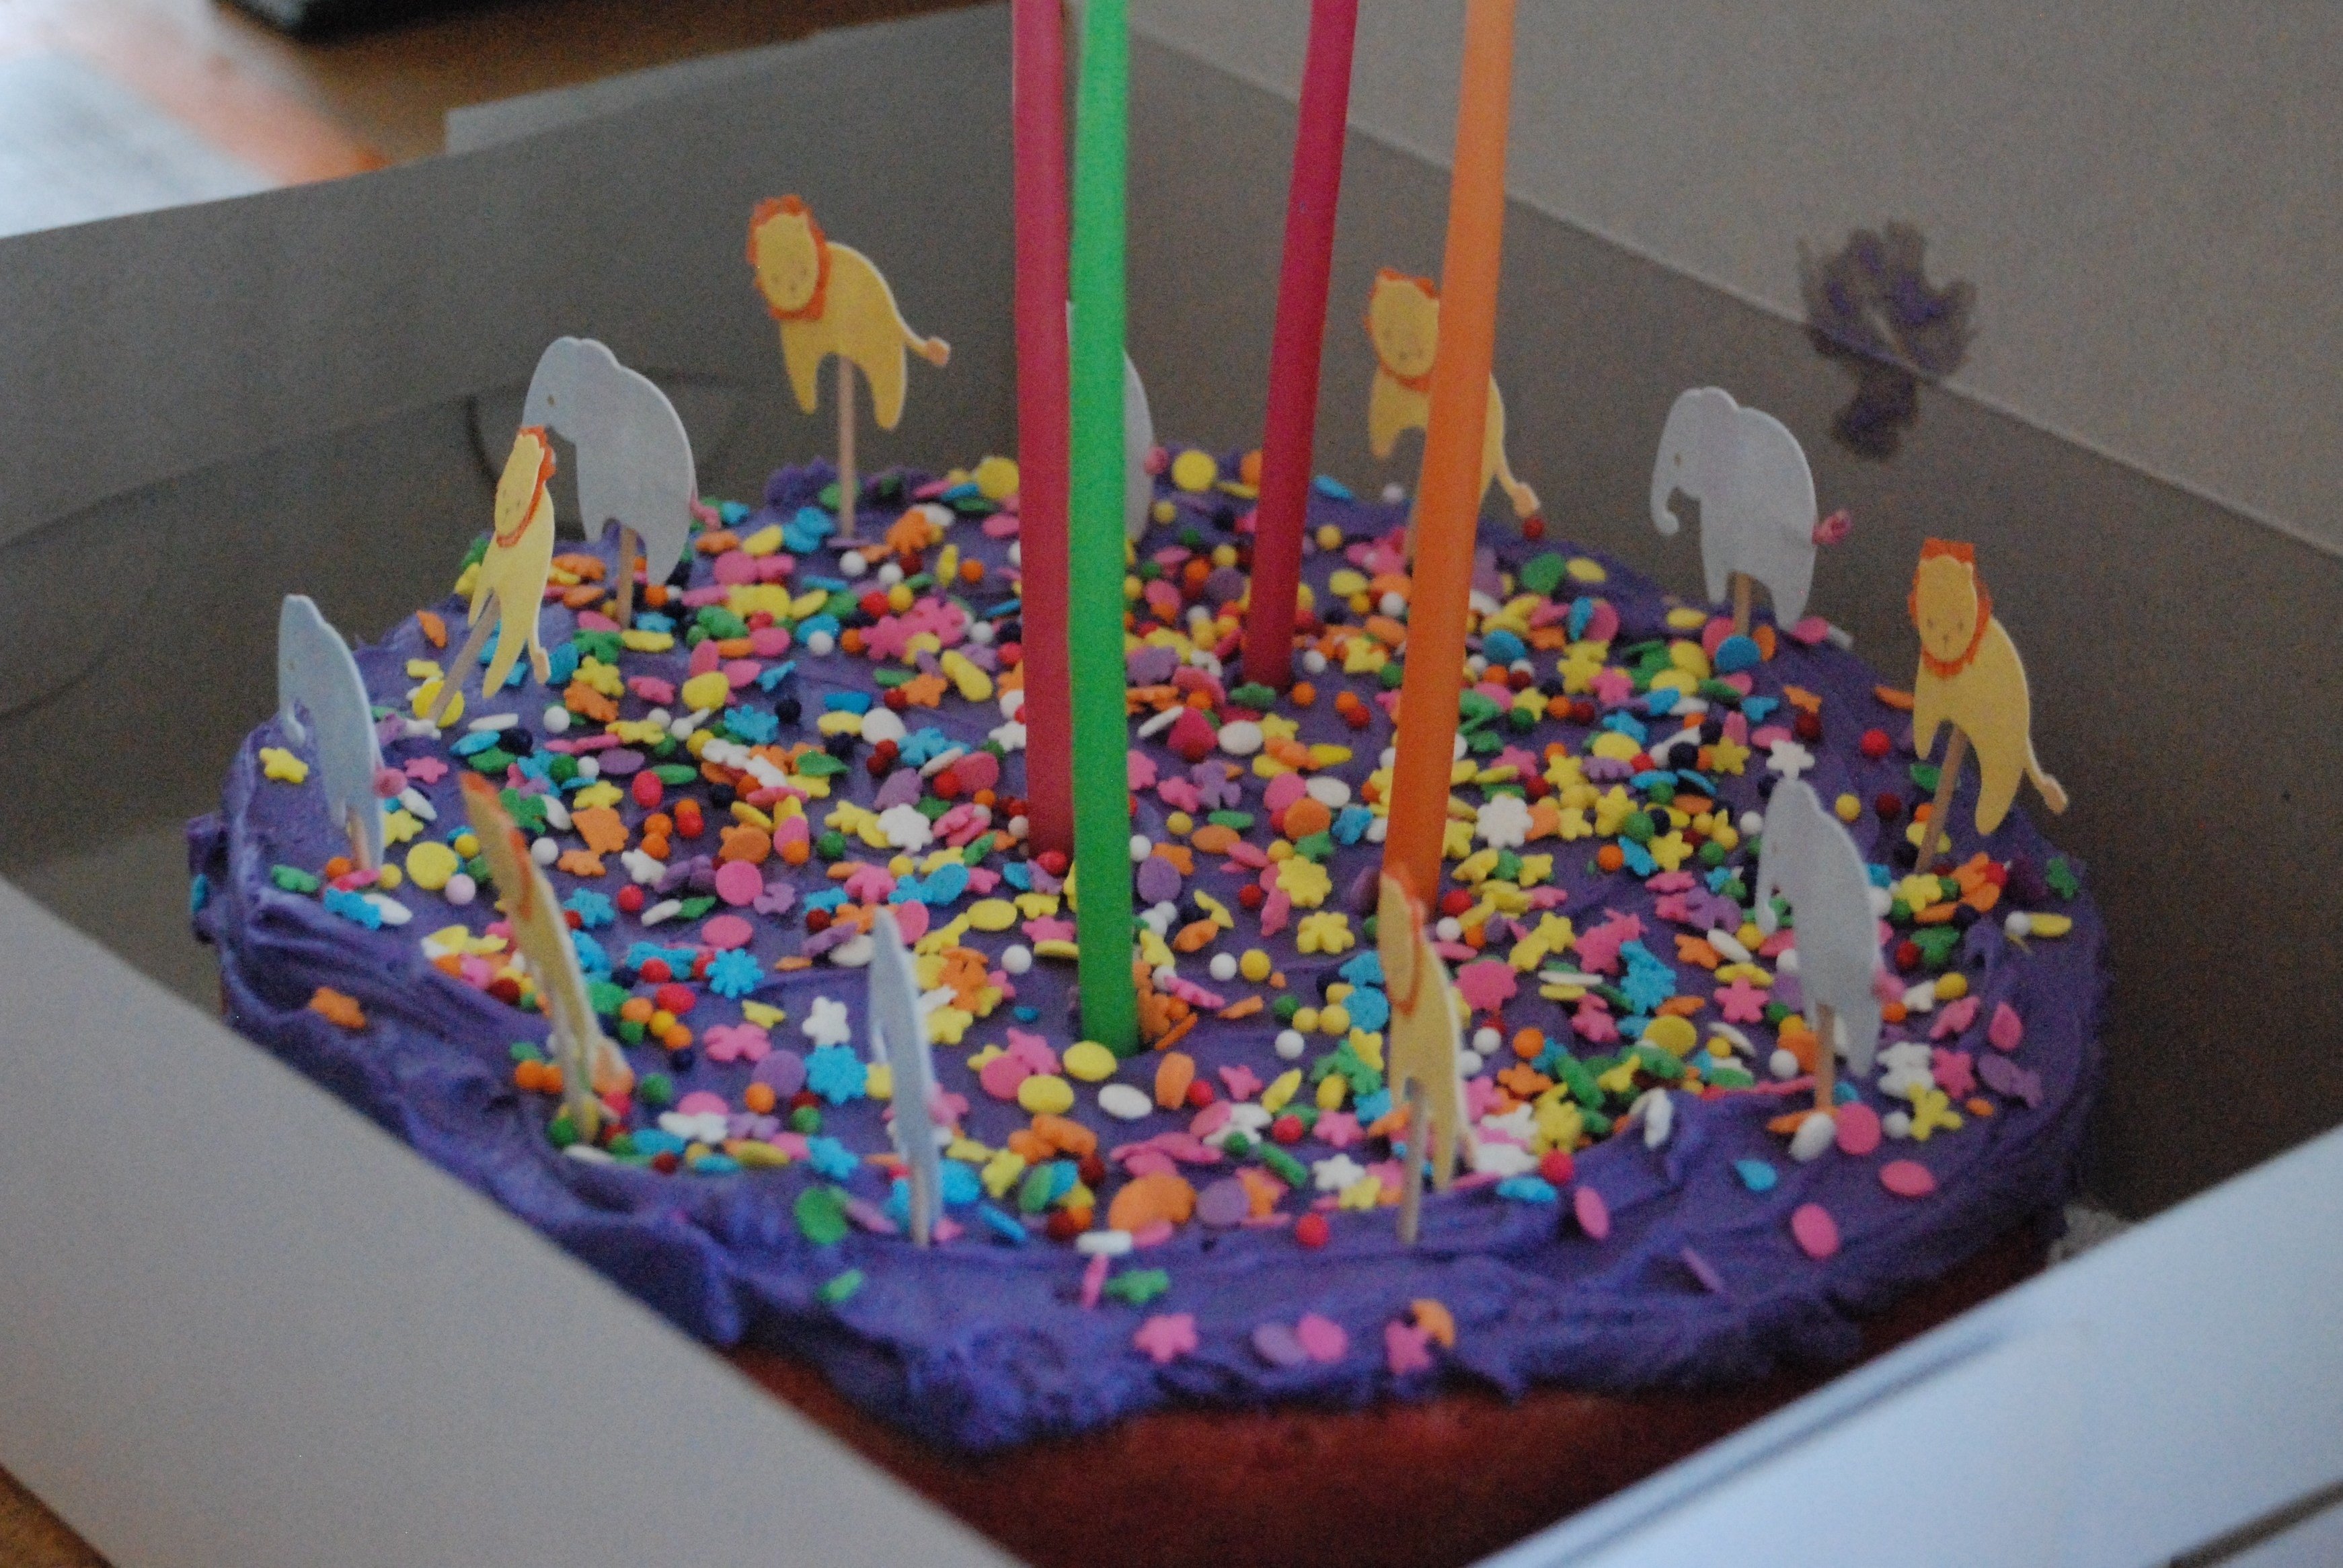 10 Great 19 Year Old Birthday Ideas photo of the day 4 year old birthday cake zomppa food good 2022